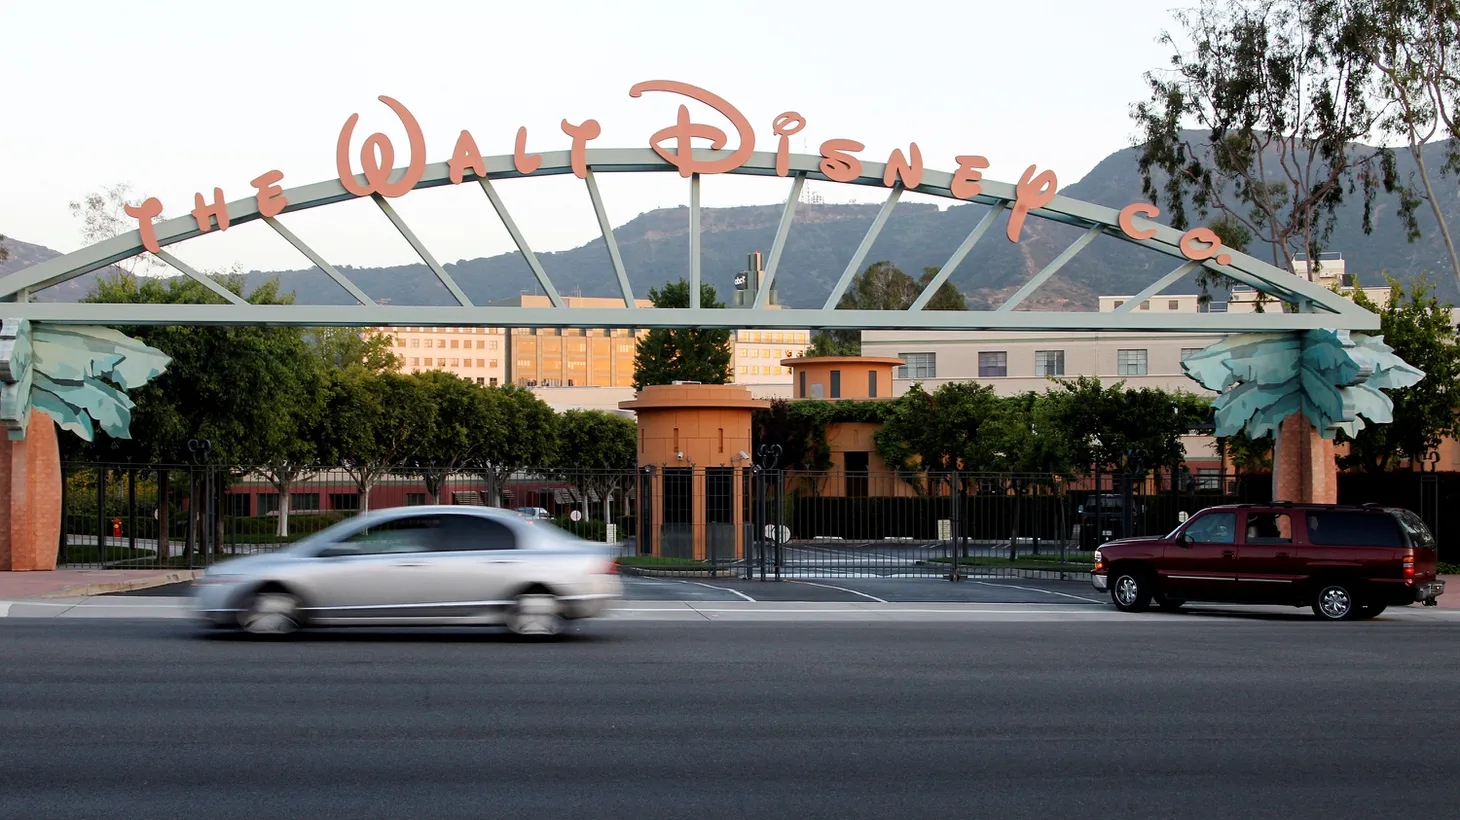 Cars drive by the signage at the main gate of The Walt Disney Co. in Burbank, California on May 7, 2012.